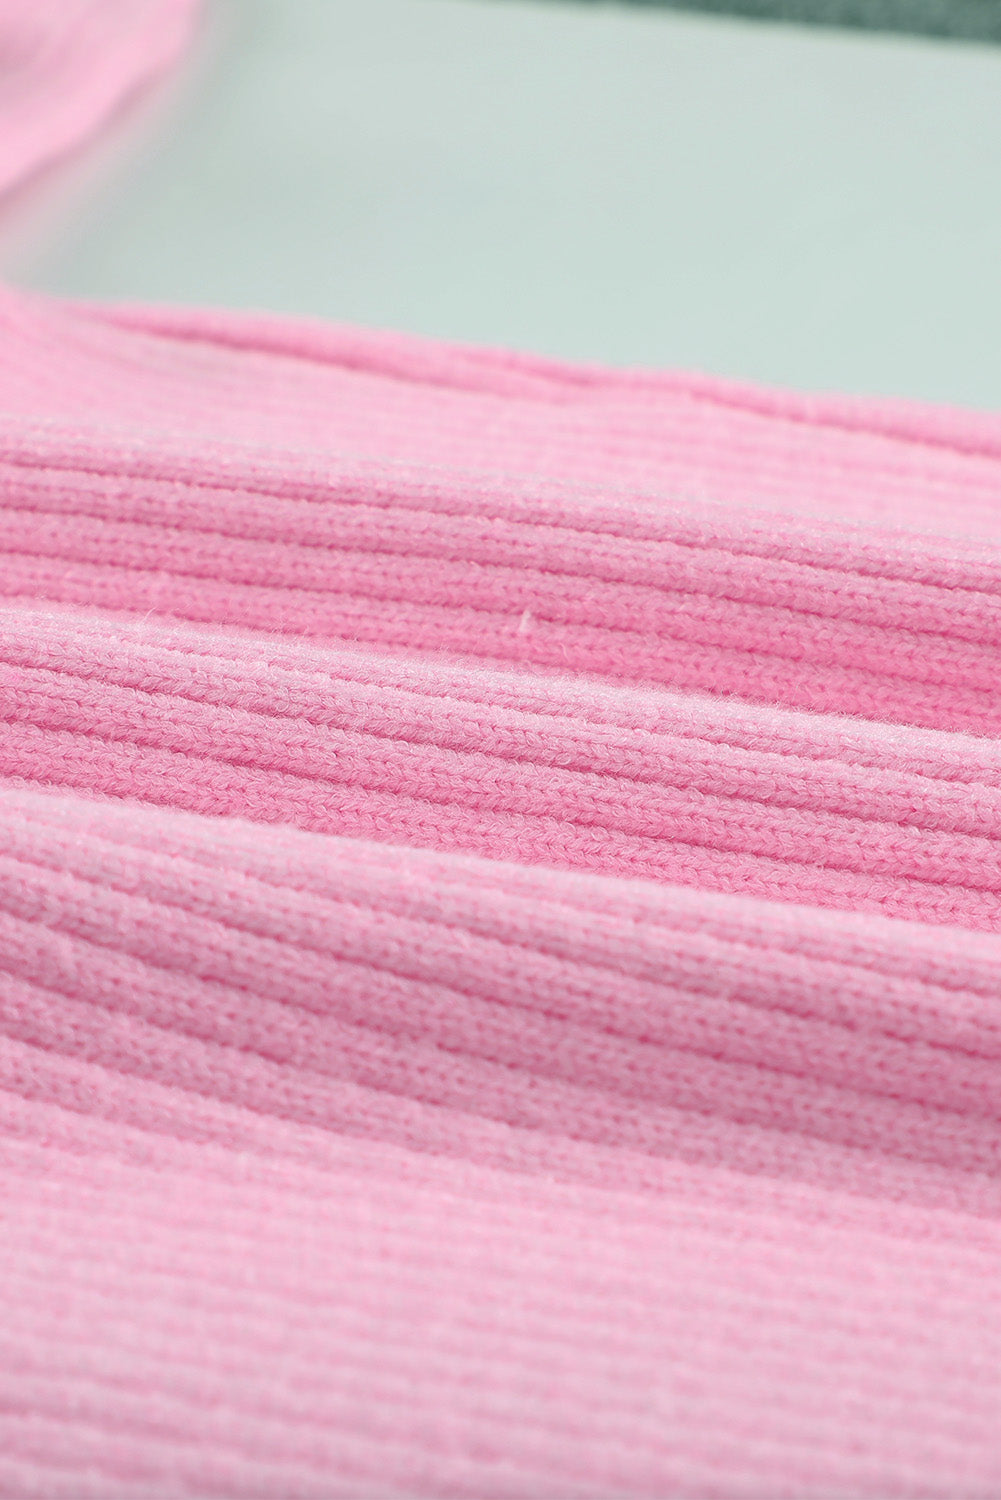 Pink Off The Shoulder Ribbed Knitted Sweater